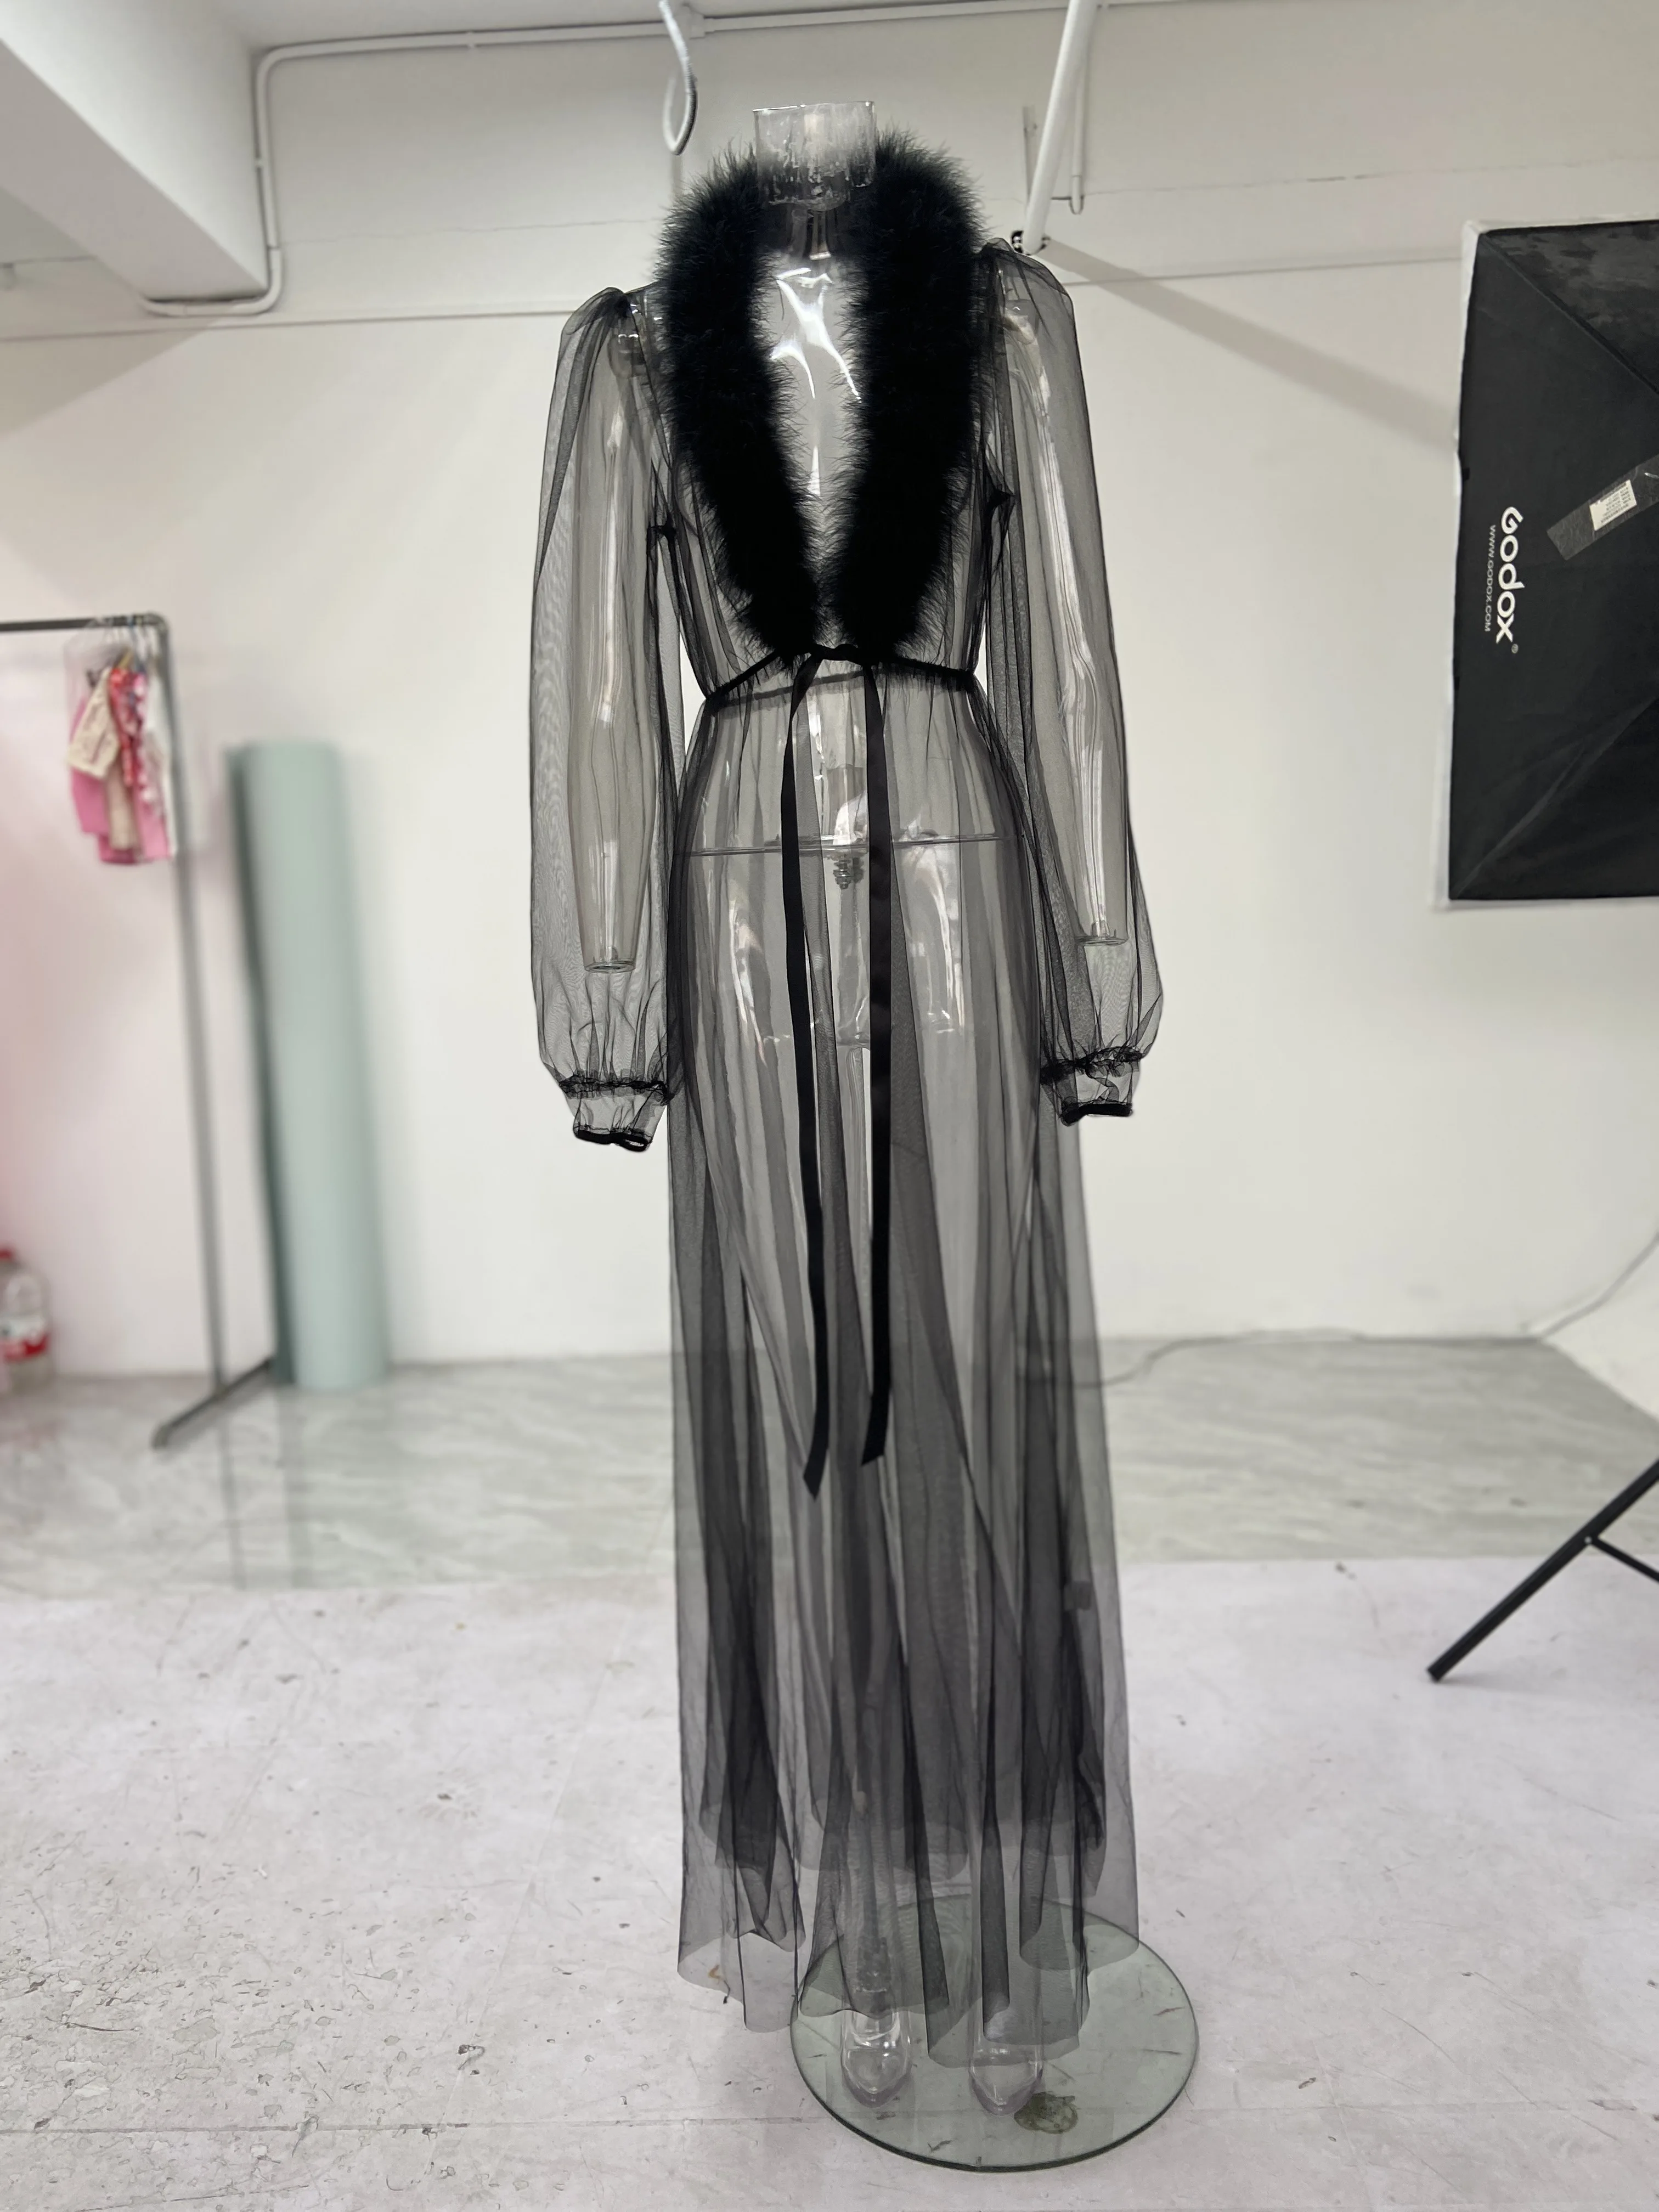 Women Sexy Robes Fuzzy Fur Collar Mesh Sheer Cover-ups See Through Long Sleeve Tied-Waist Long Gown Lingerie Maxi Cardigans Robe images - 6